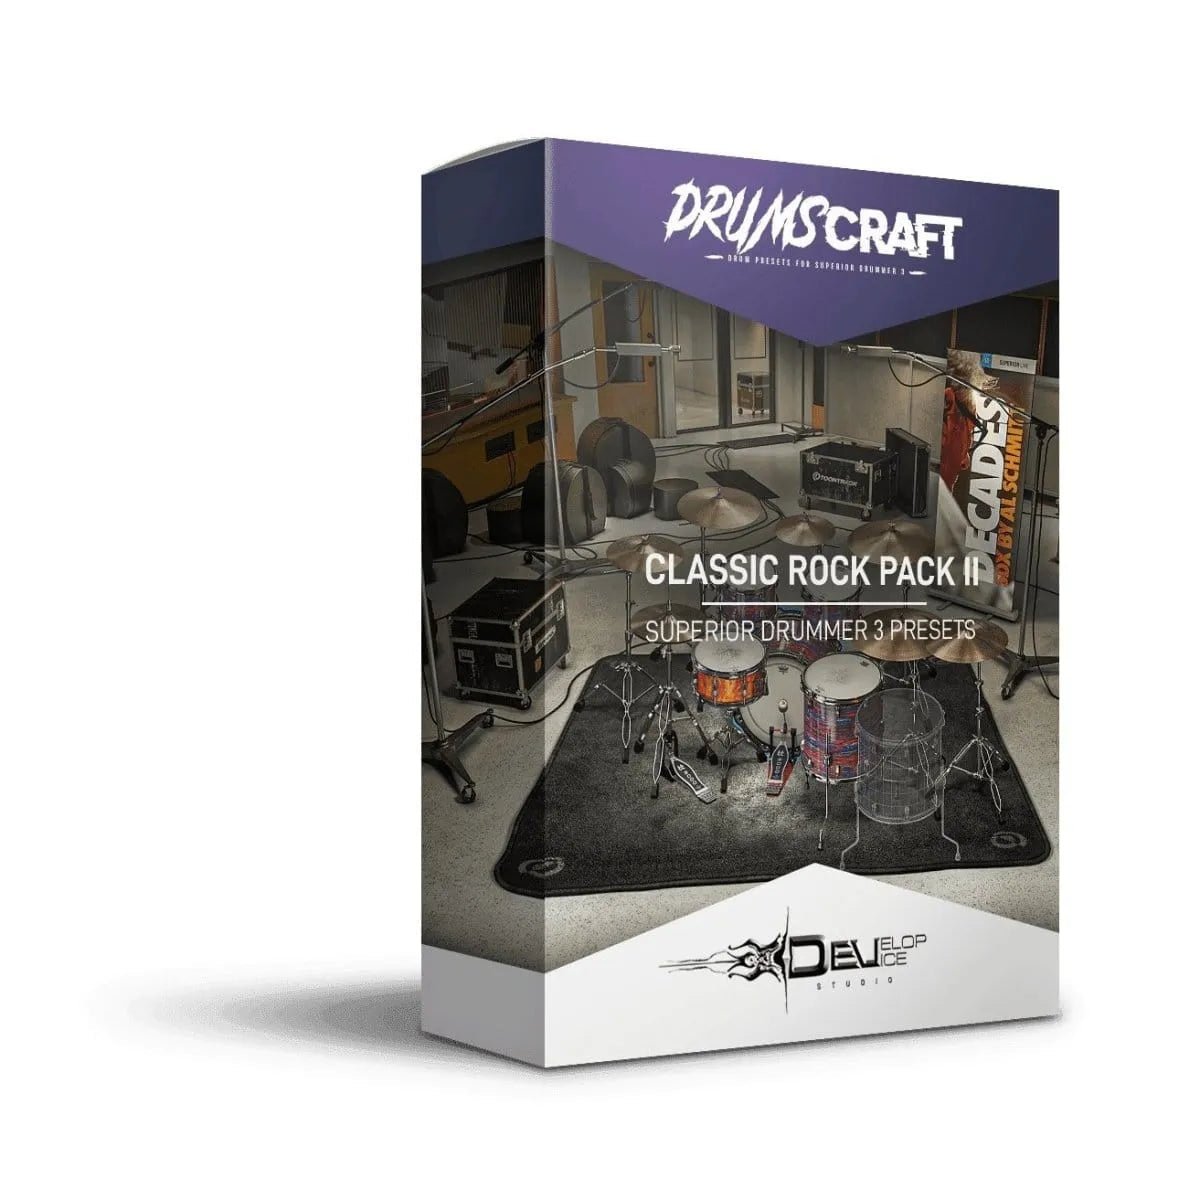 Classic Rock Pack II - 5 Presets for Superior Drummer 3 - Superior Drummer 3 Presets - Develop Device Studio